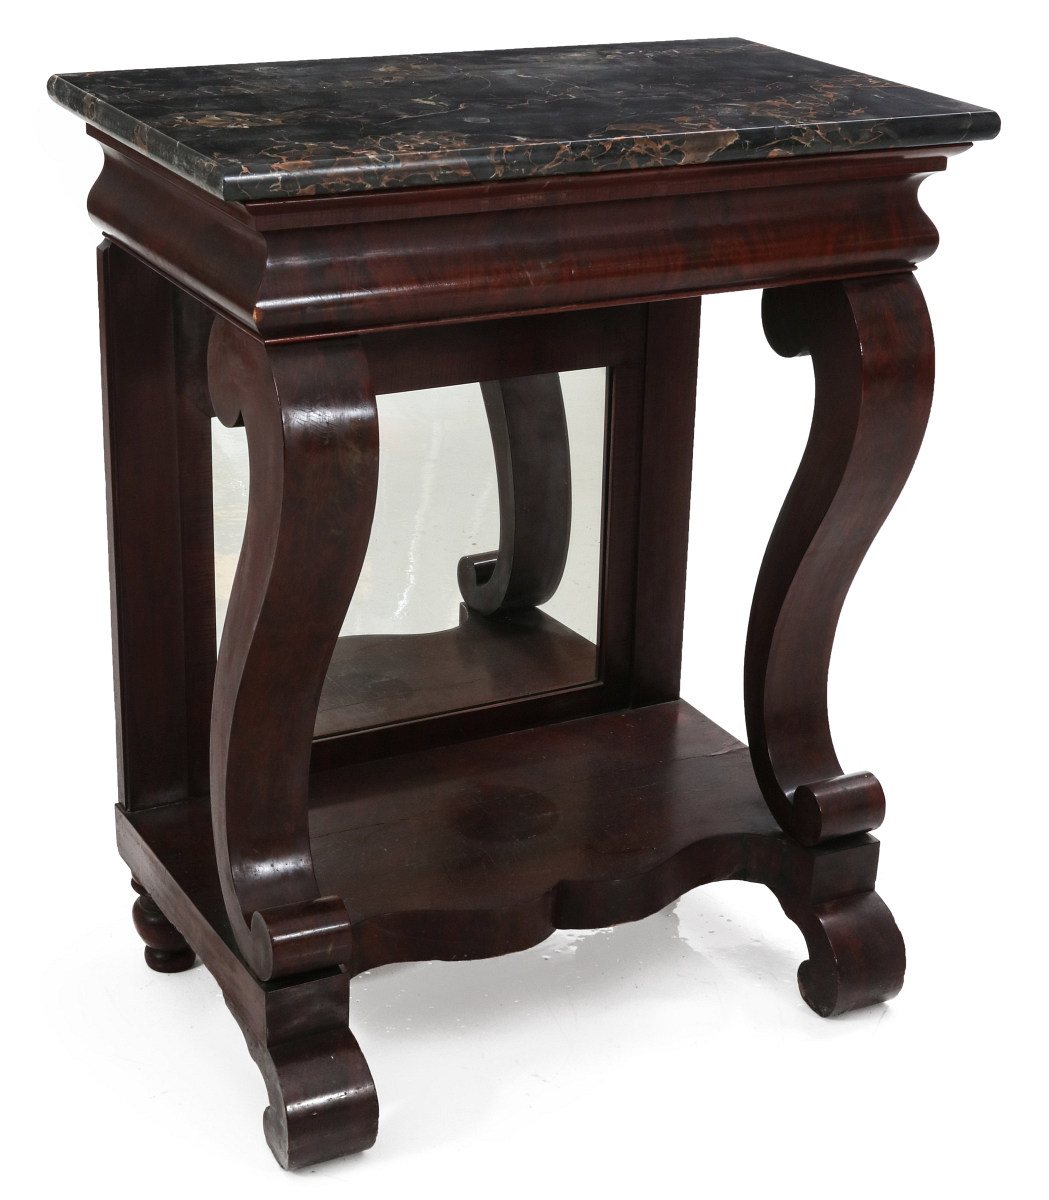 A 19TH C AMERICAN EMPIRE STYLE PIER TABLE W/MARBLE